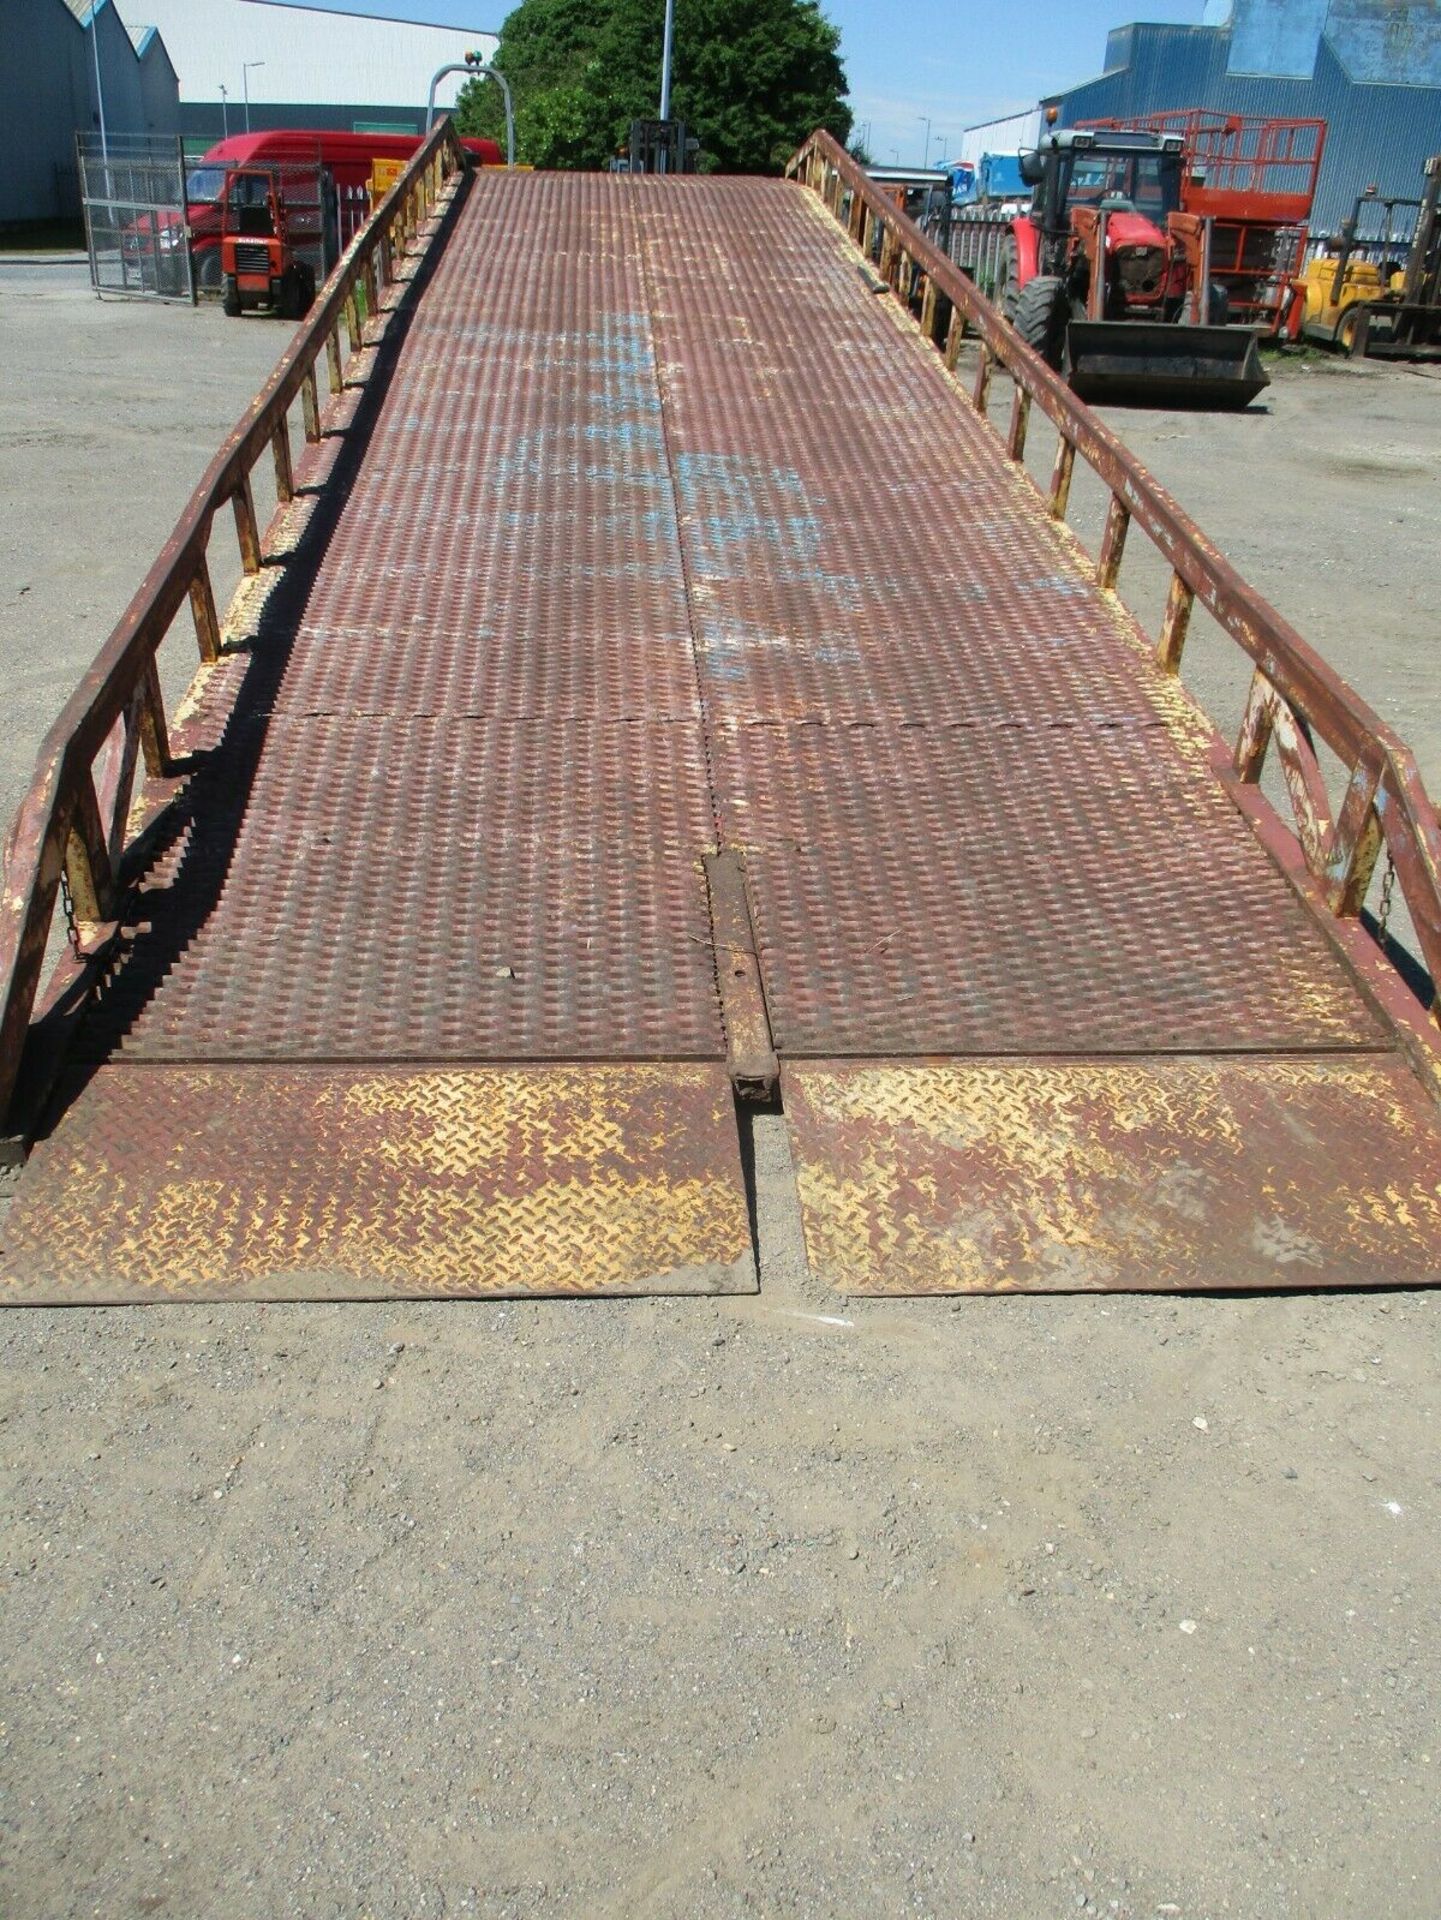 Container loading ramp - Image 7 of 10